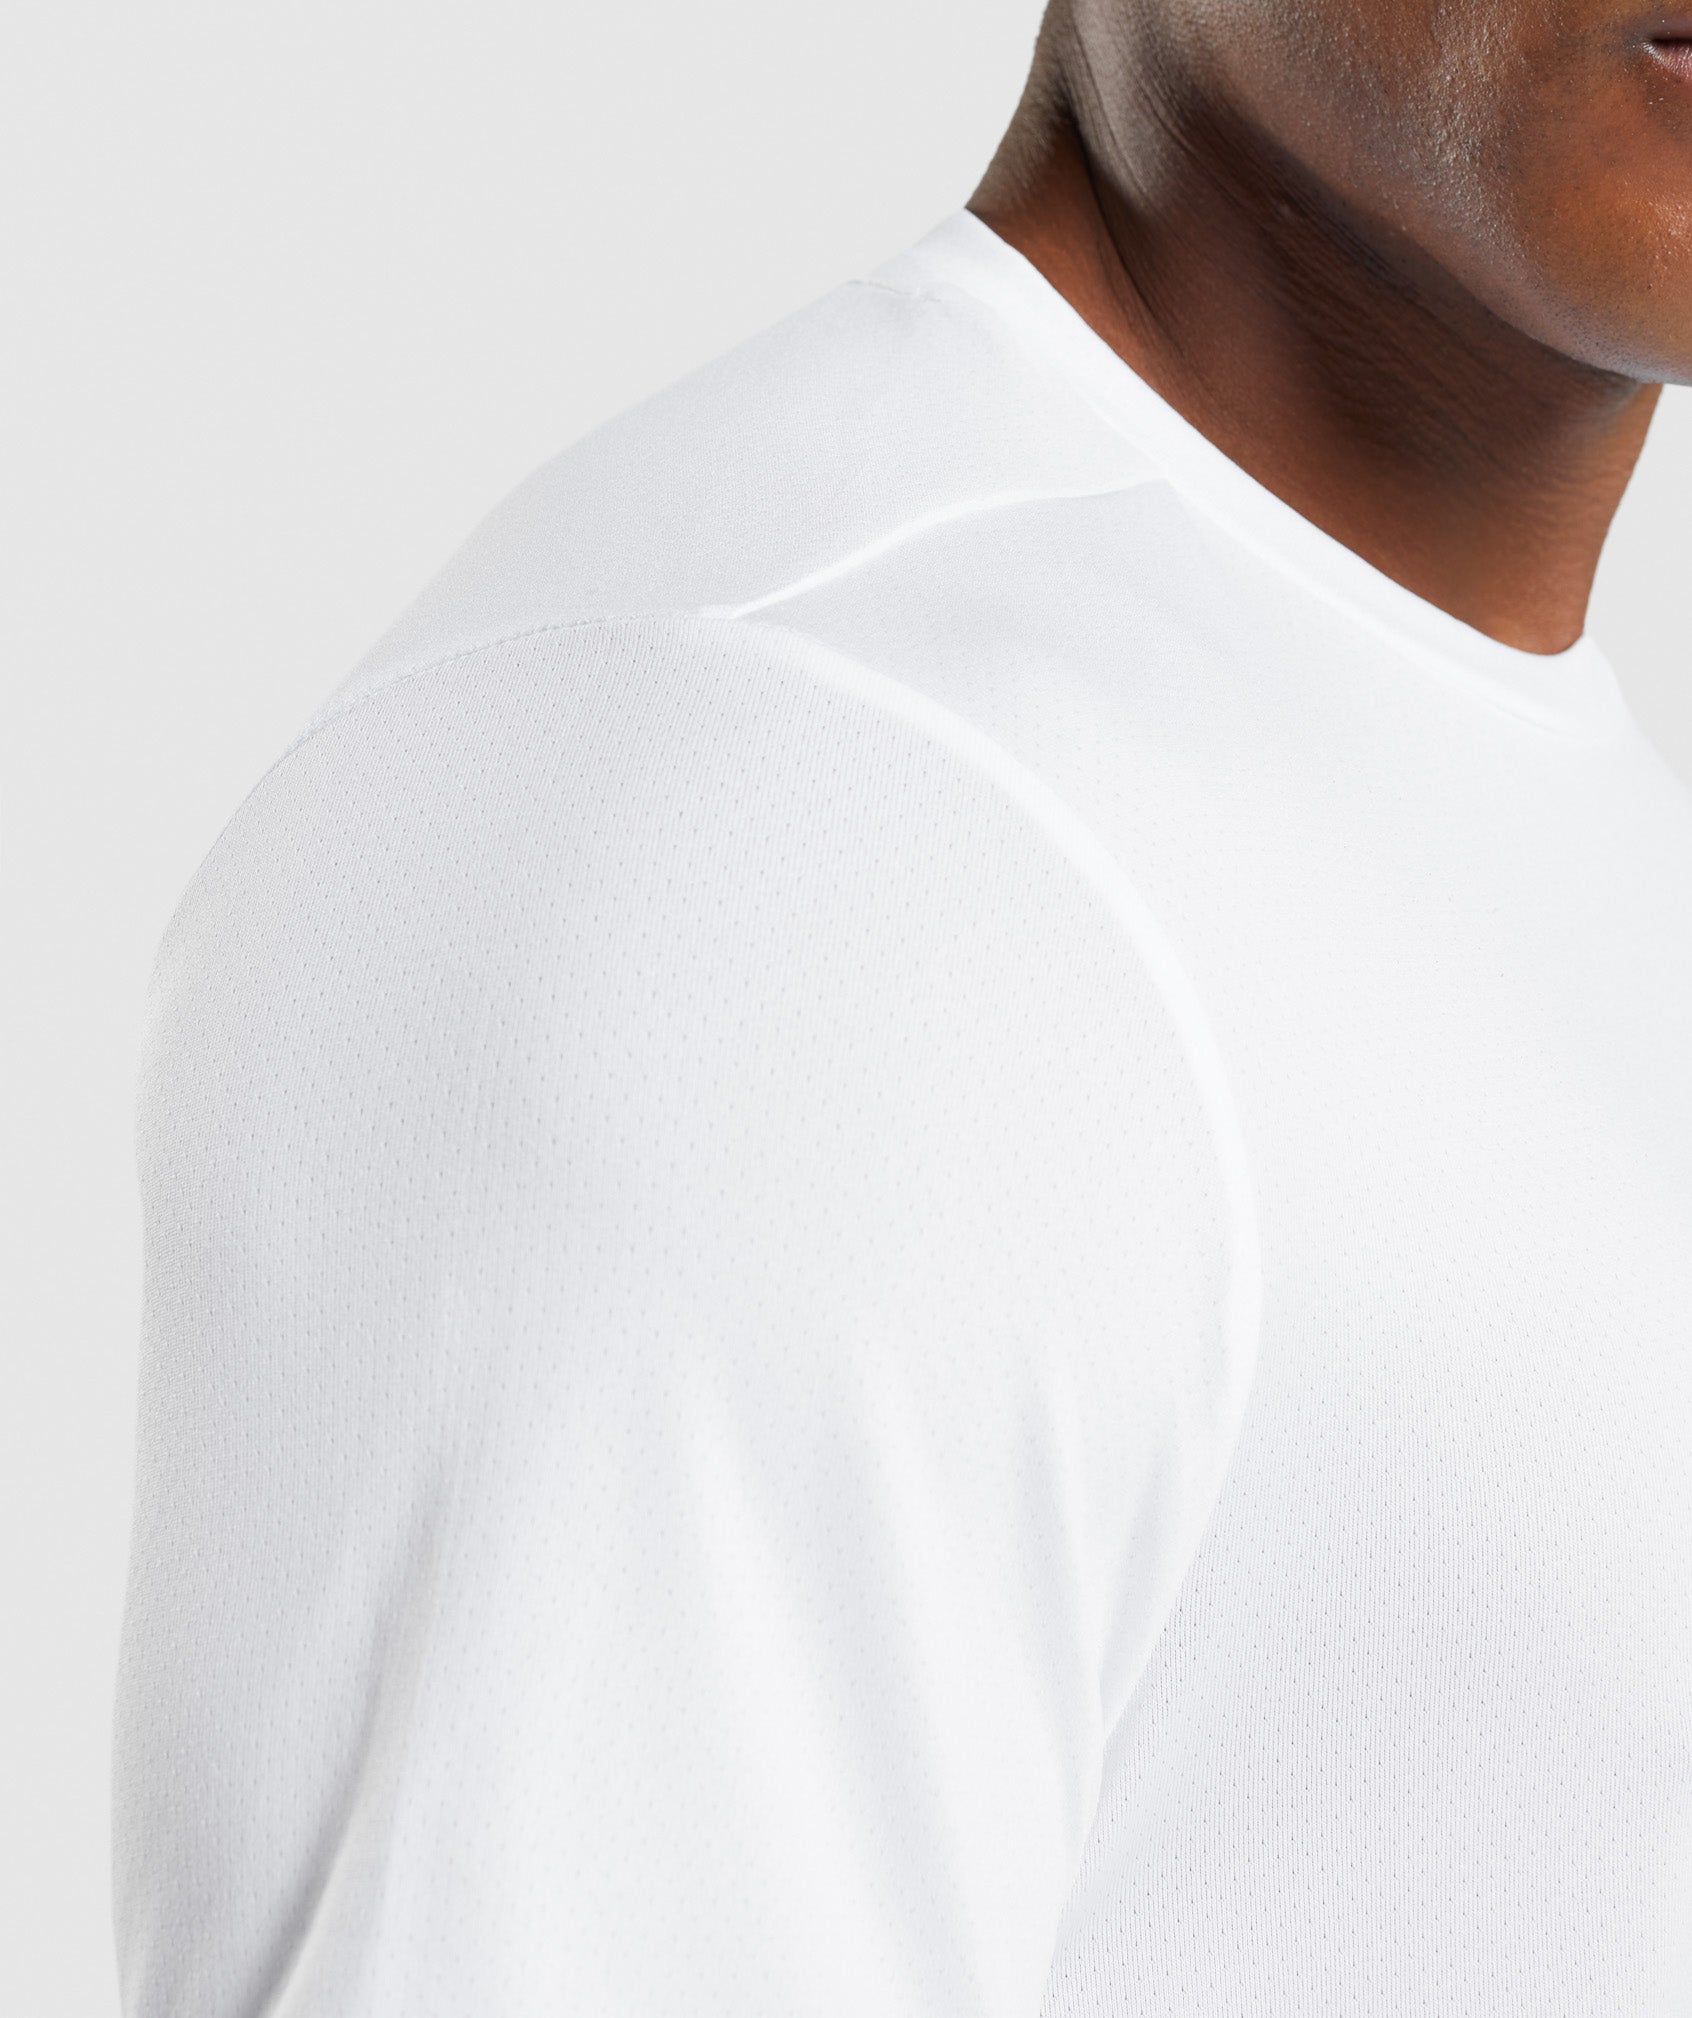 Arrival Regular Fit T-Shirt in White - view 6